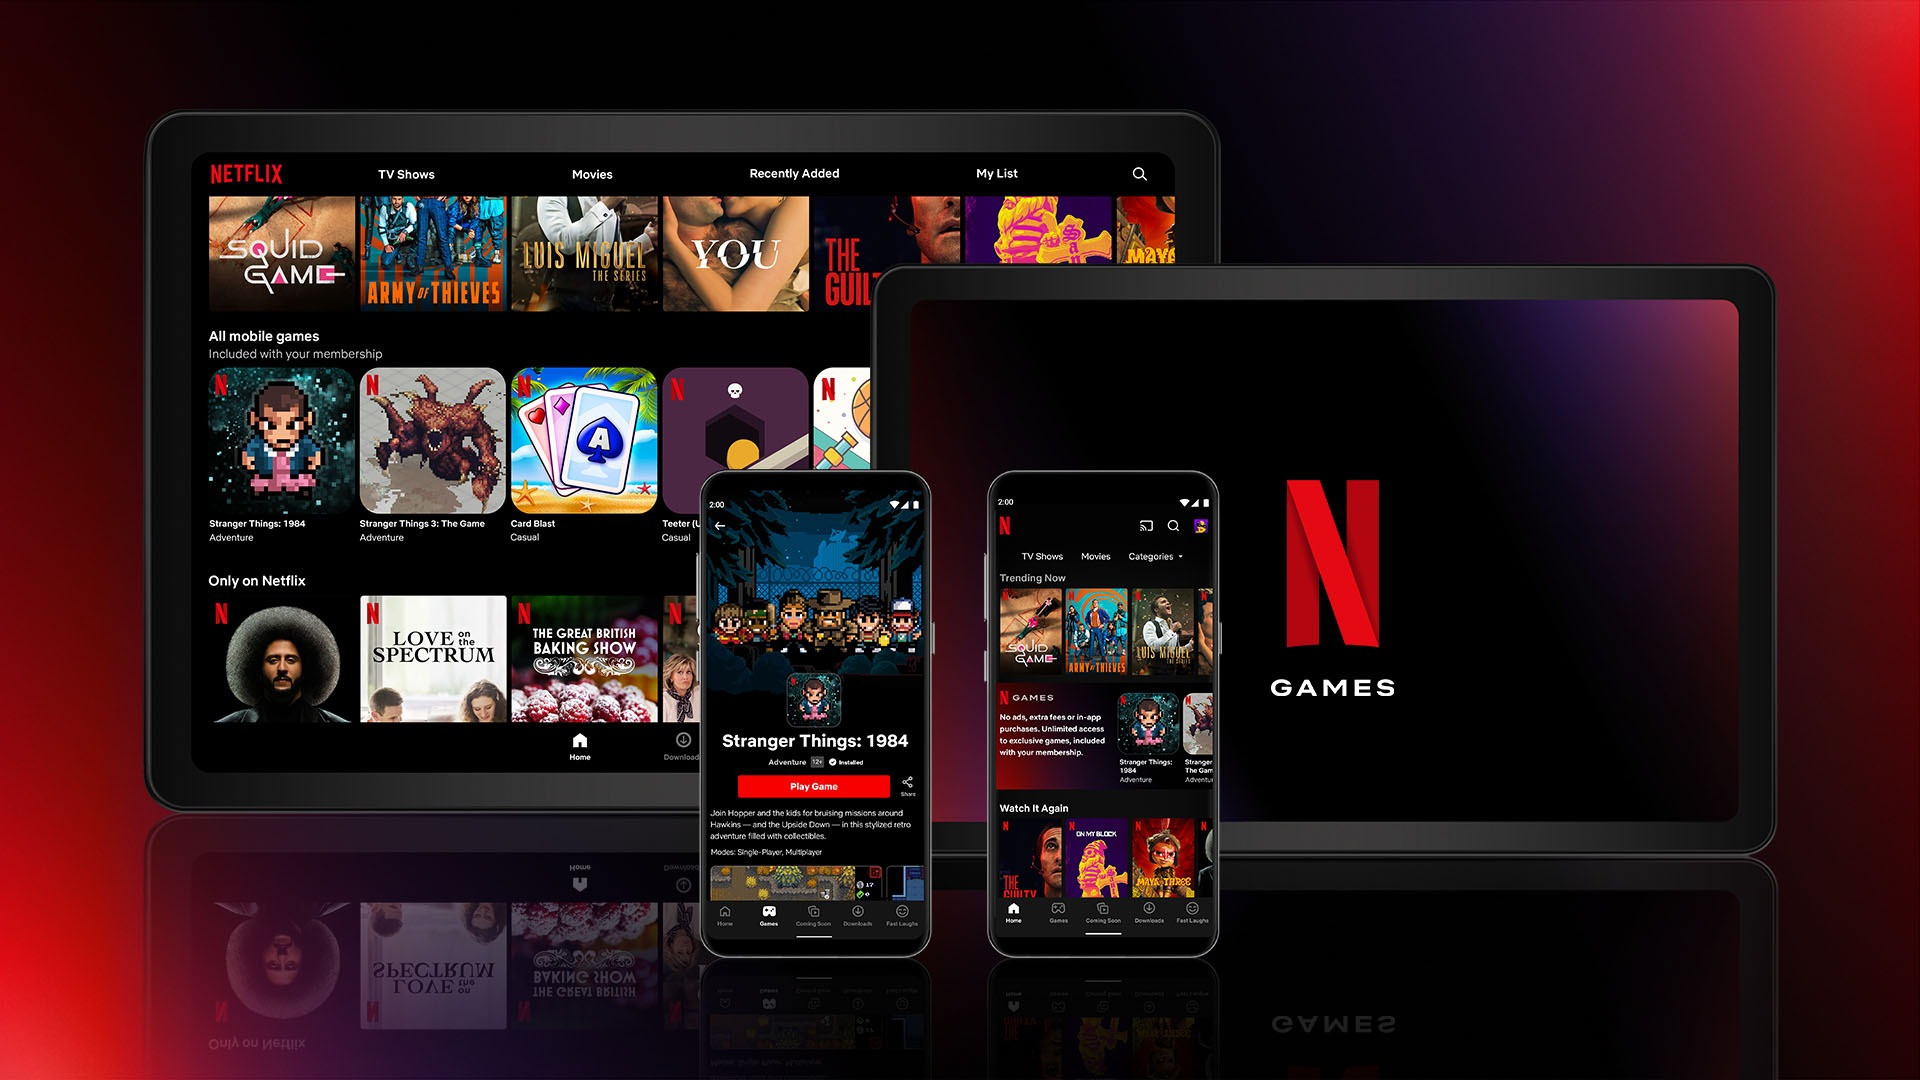 Netflix plans to add 40 more gaming titles this year